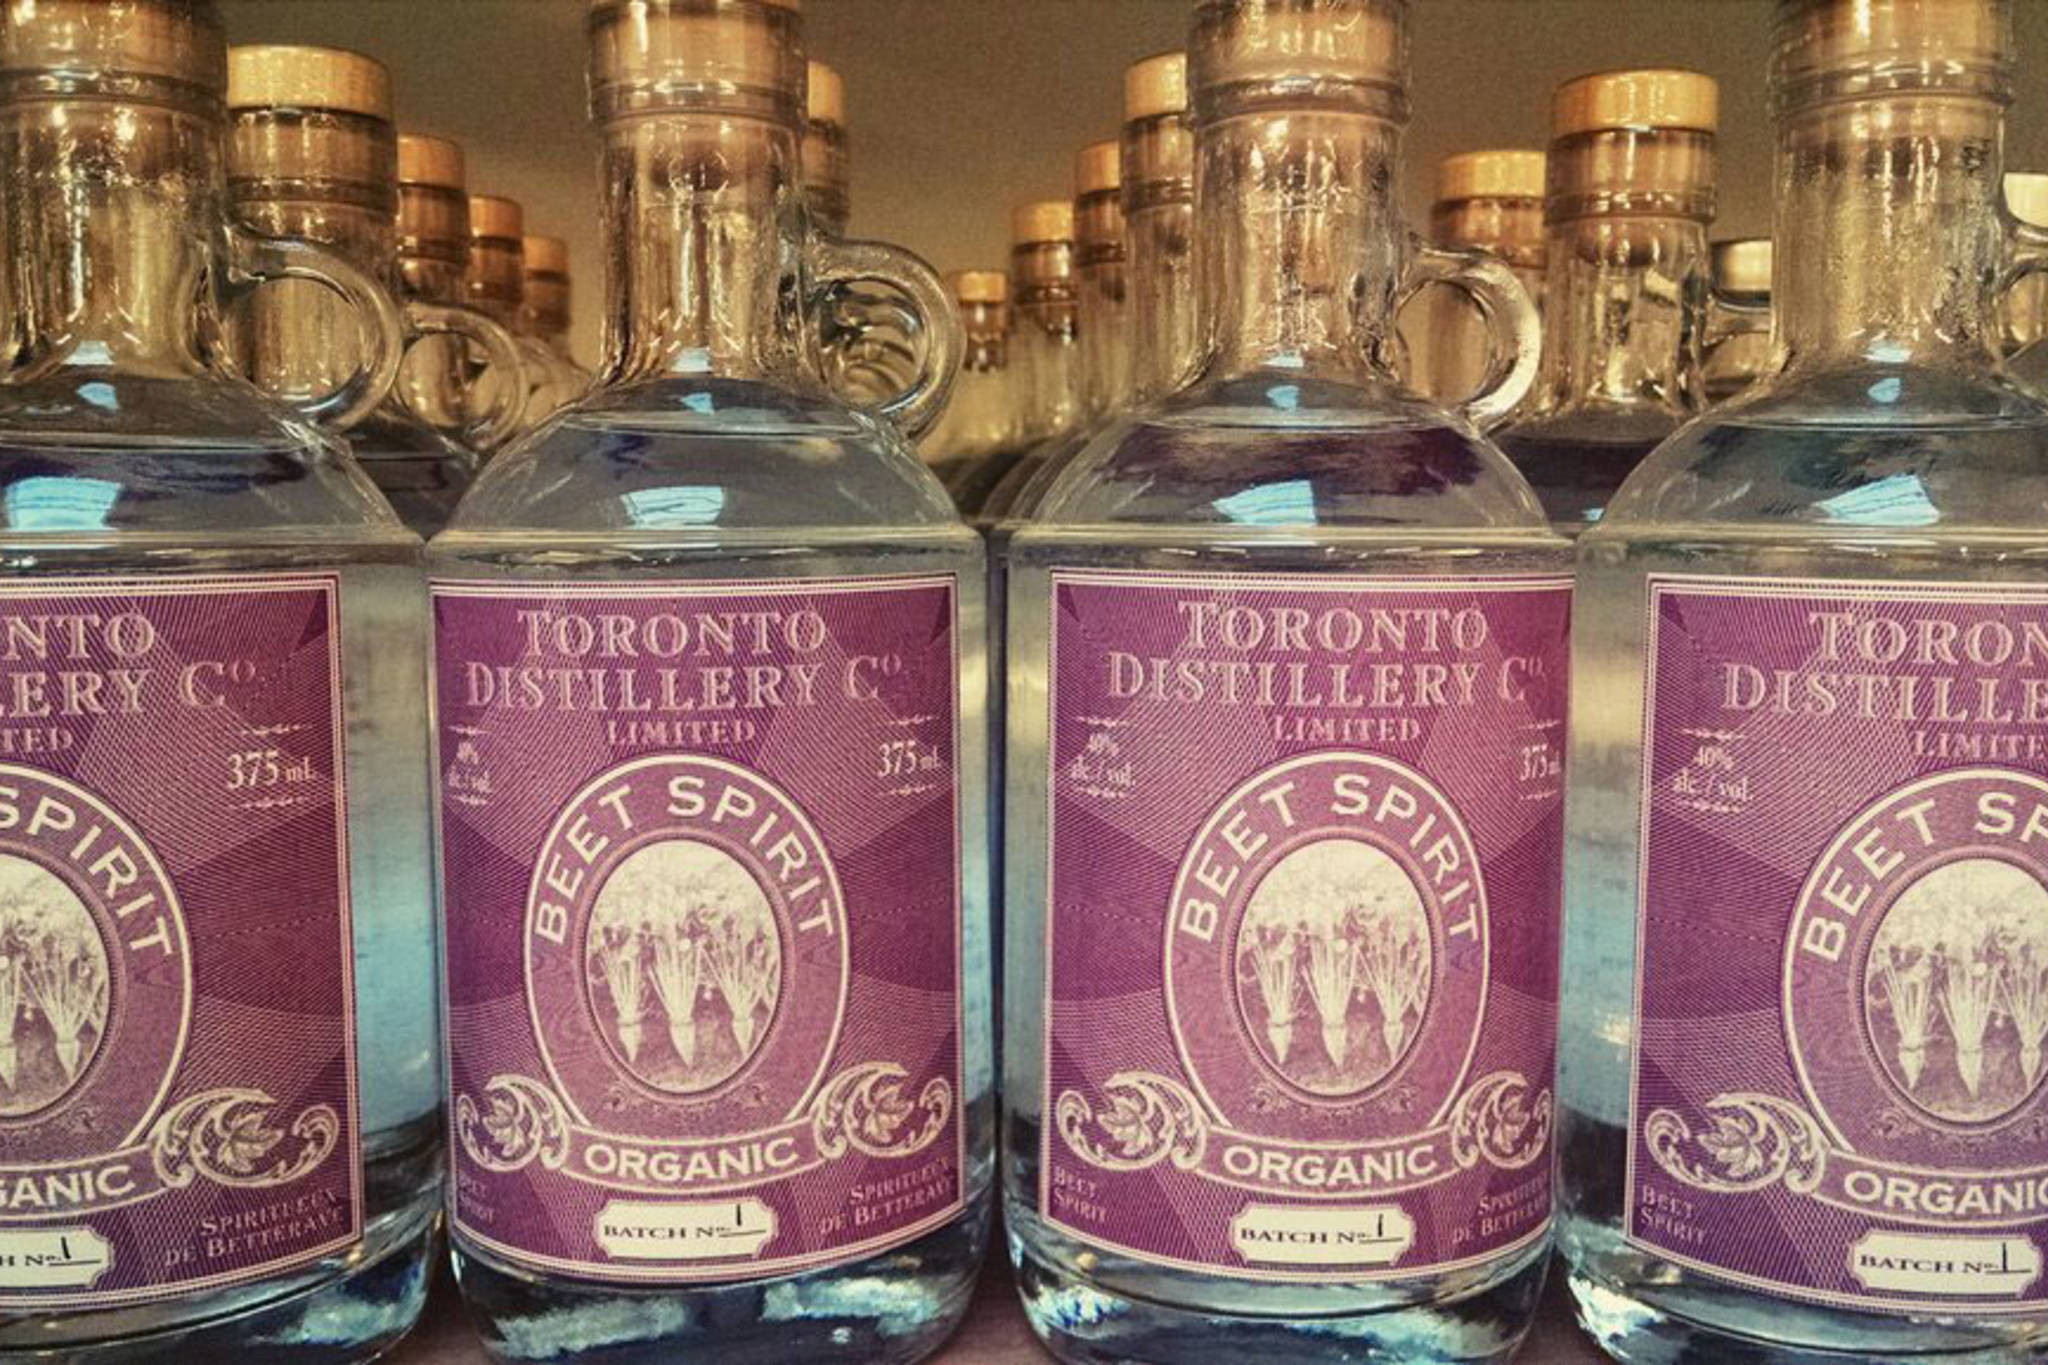 Holiday Drink Gift Ideas
 10 holiday t ideas for cocktail lovers in Toronto